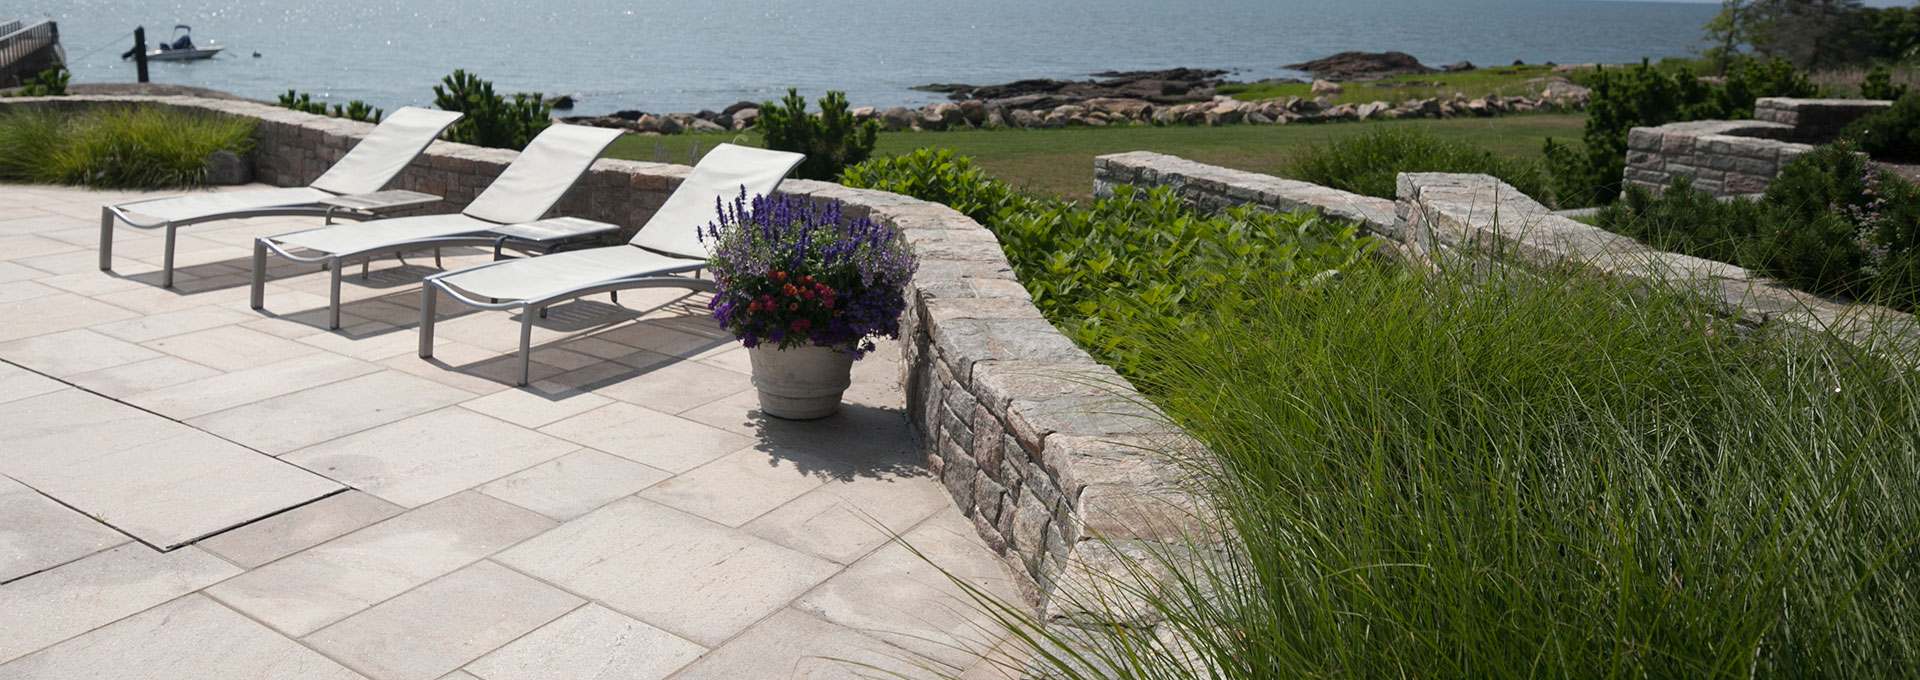 Flagging Stone - Durable Stone for Outdoors, Backyard Stone Walls and Patios